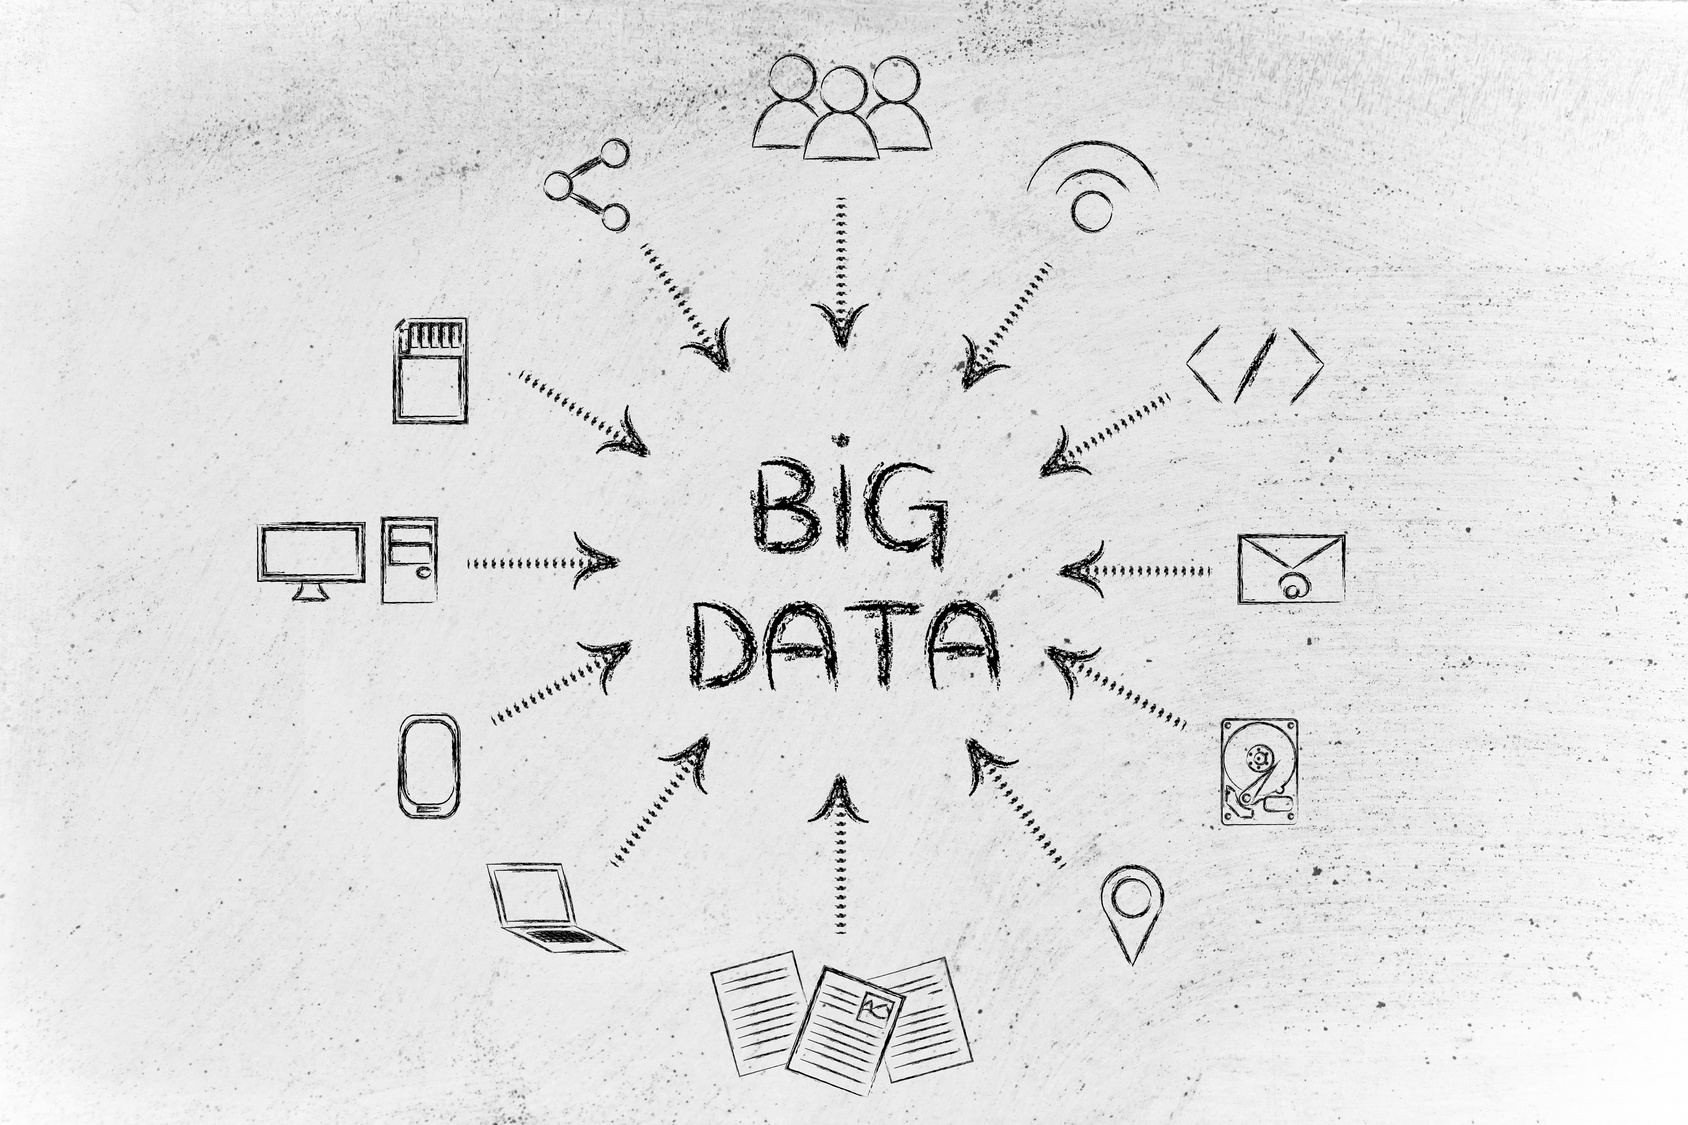 concept of big data processing and cloud computing: users, devices and file transfers